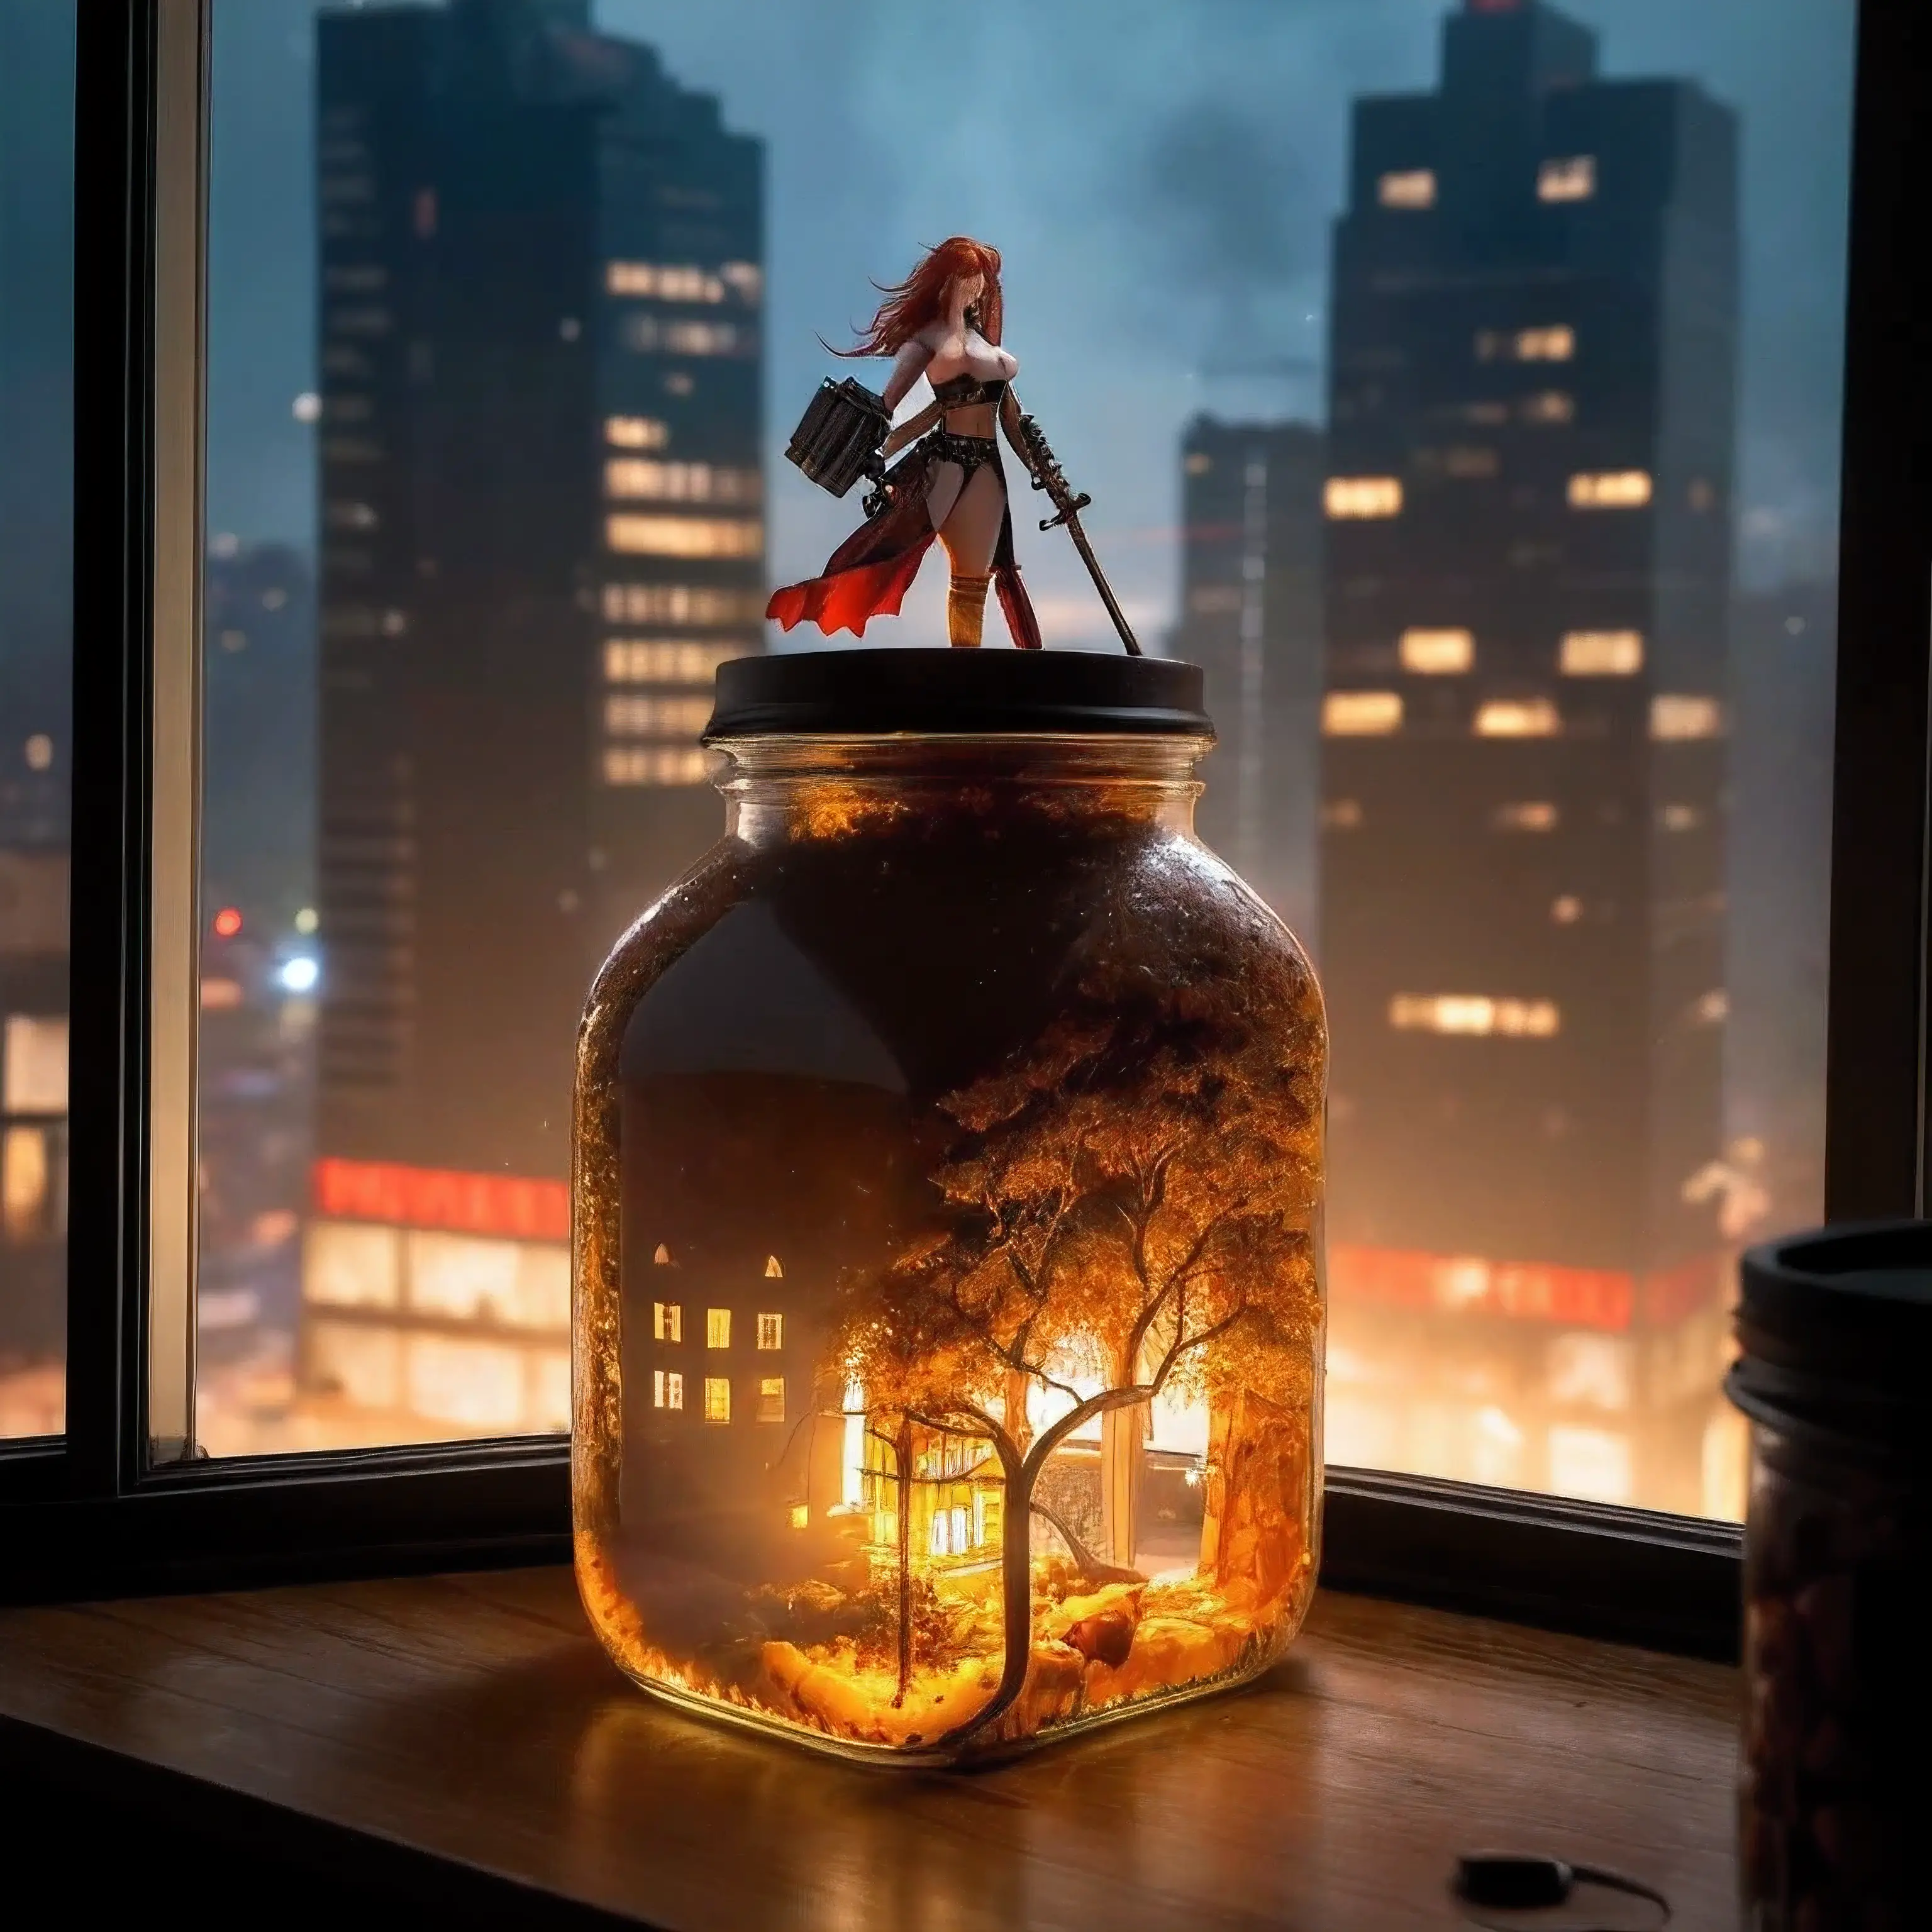 at night, a beautiful big breasted naked red head girl is looking at a jar with a city inside a square glass jar with lid, placi...